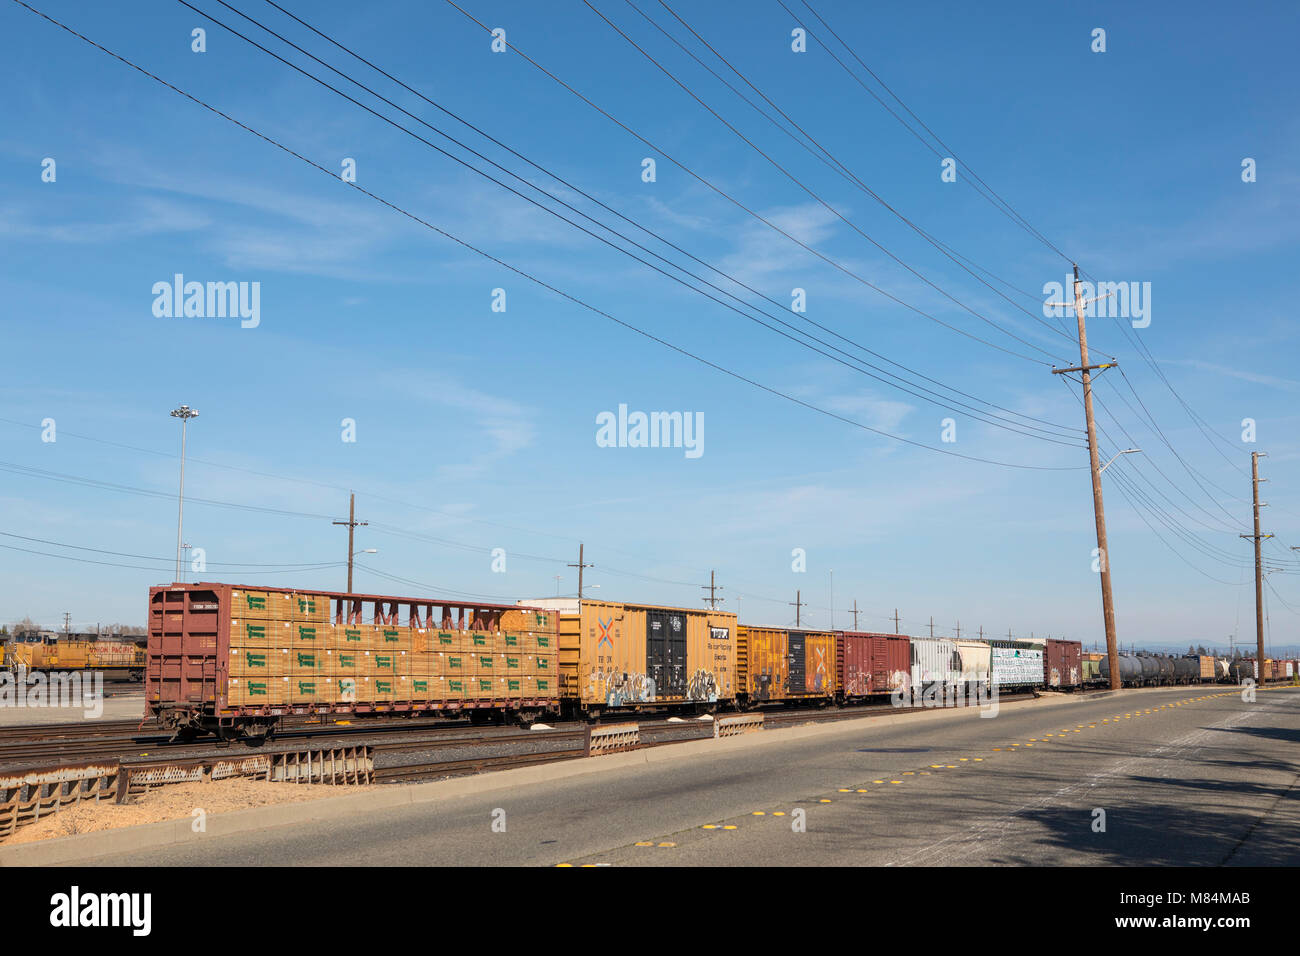 Back end of a long goods train in the shunting yards of Roseville California. Pacific Union rolling stock disappearing into the distance. Stock Photo